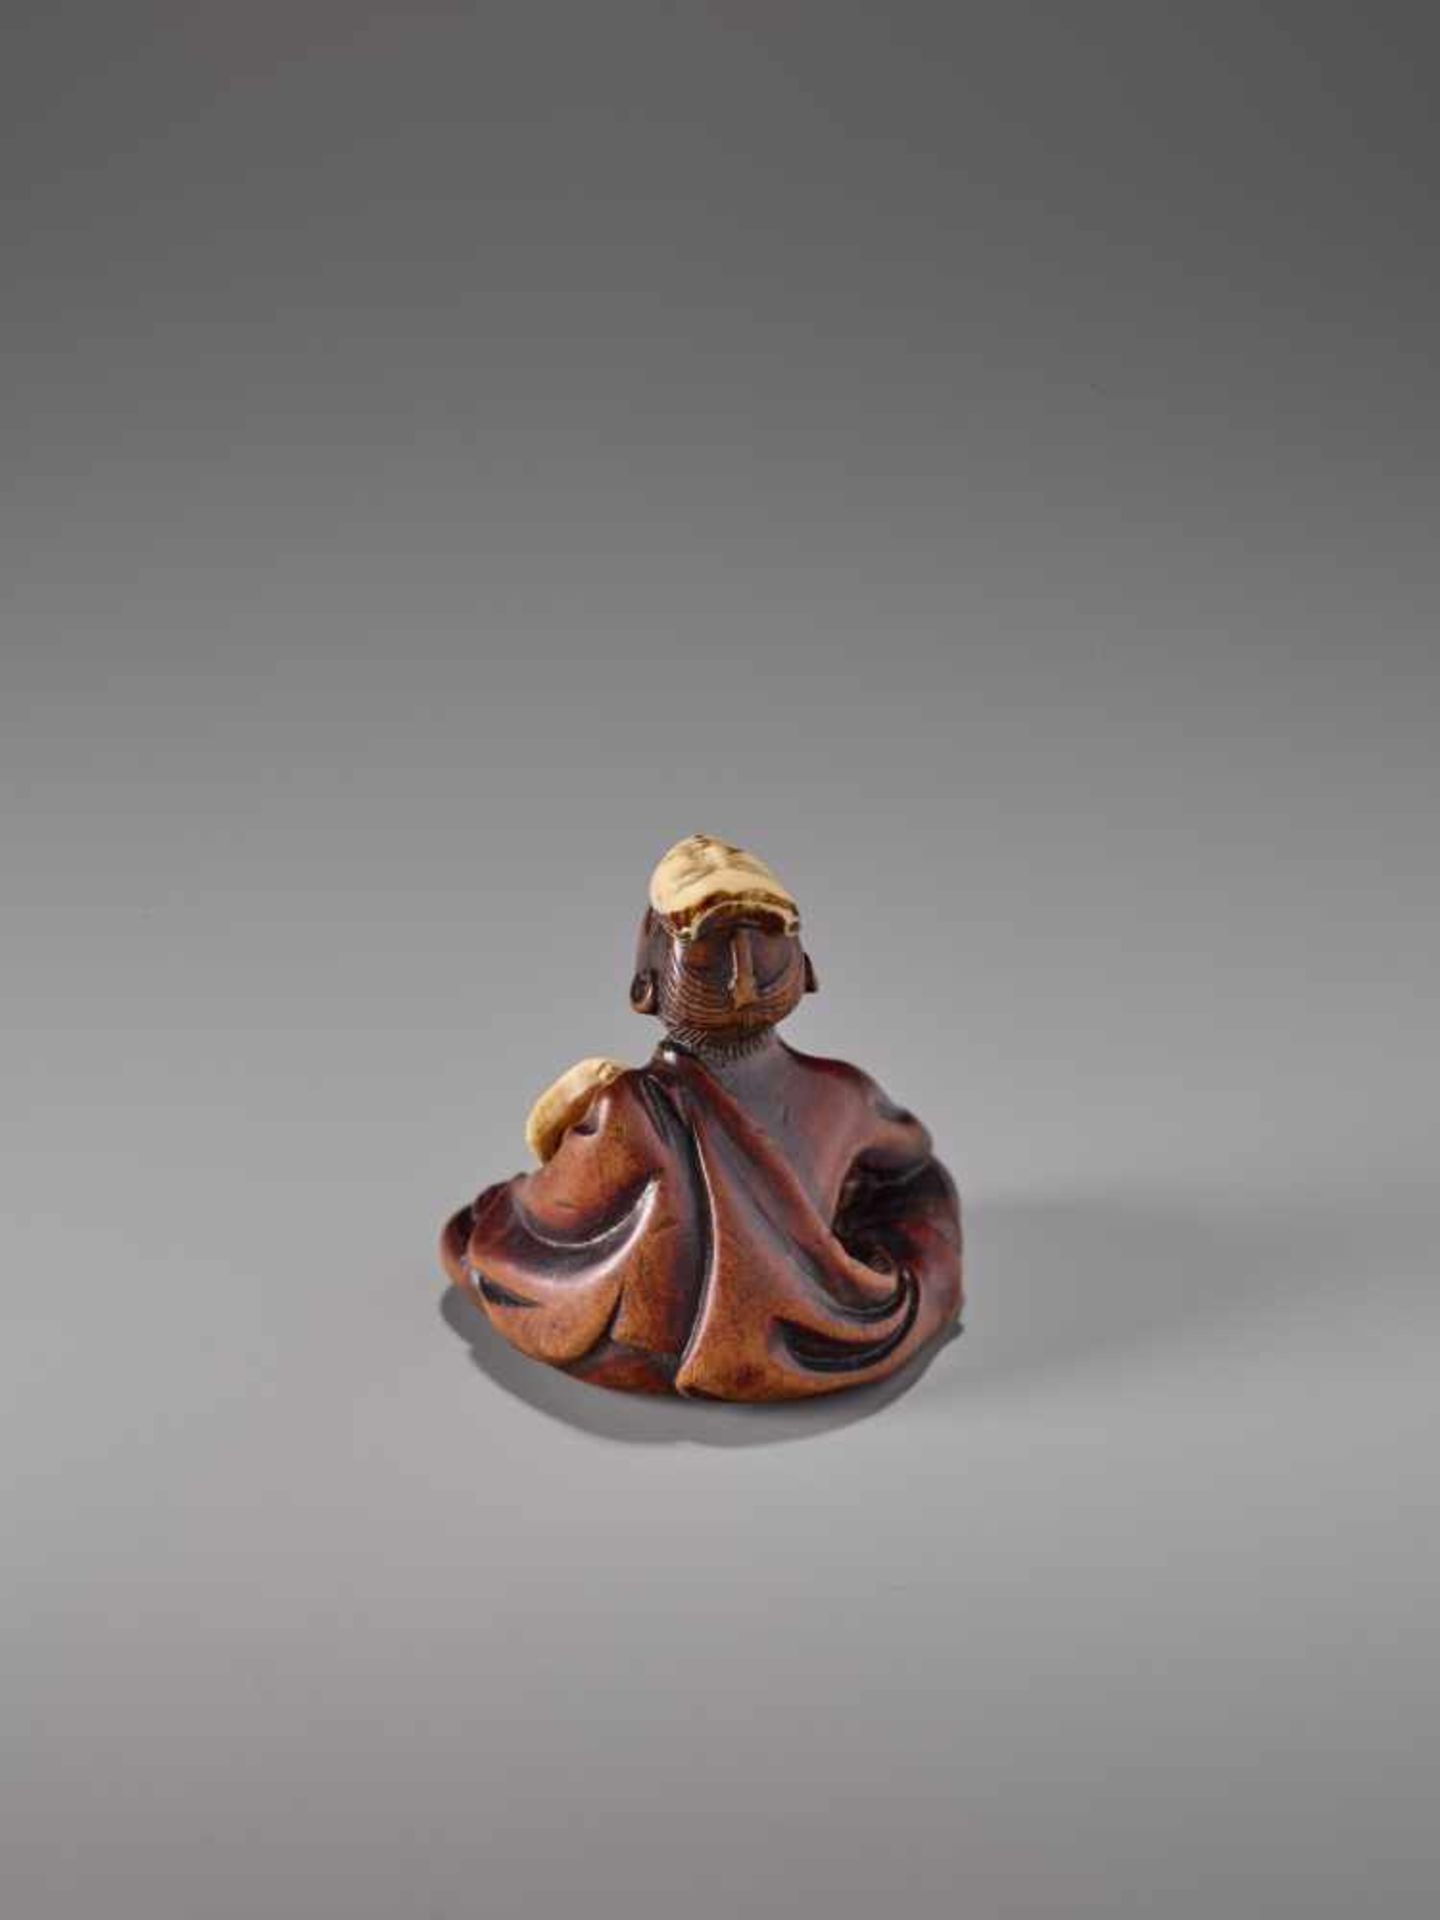 AN UNUSUAL WOOD AND IVORY NETSUKE OF A SNEEZER AS A NOH ACTOR BY HOKEIWood netsuke with - Image 3 of 7